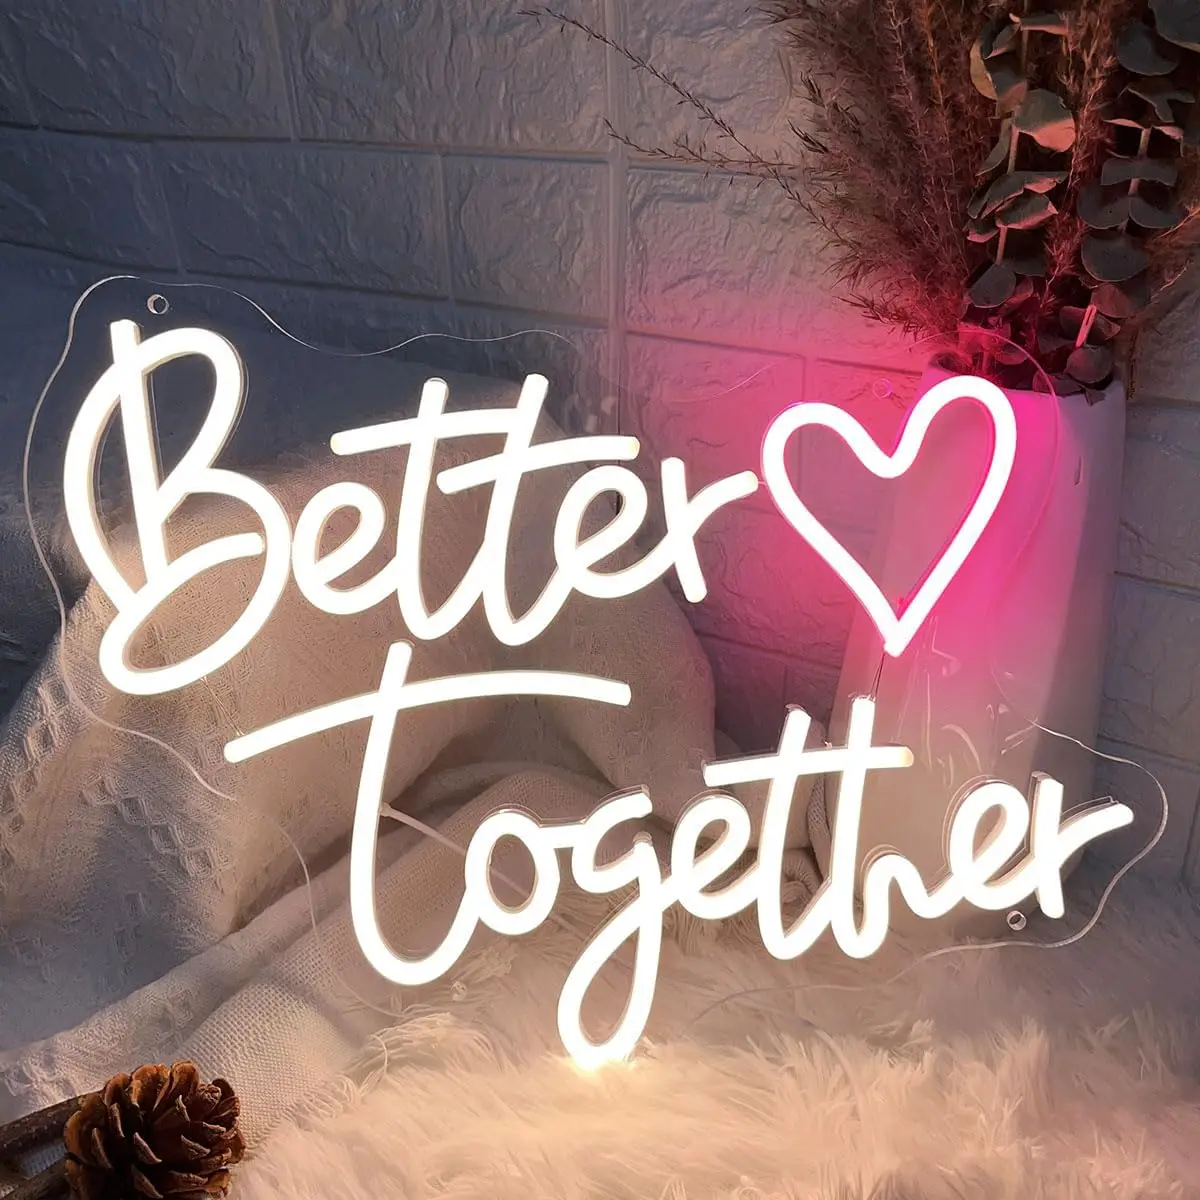 

Better Together Neon Sign LED Light Signs Aesthetic for Bedroom Home Decor Wall Art Anniversary Valentines Day Wedding Gift